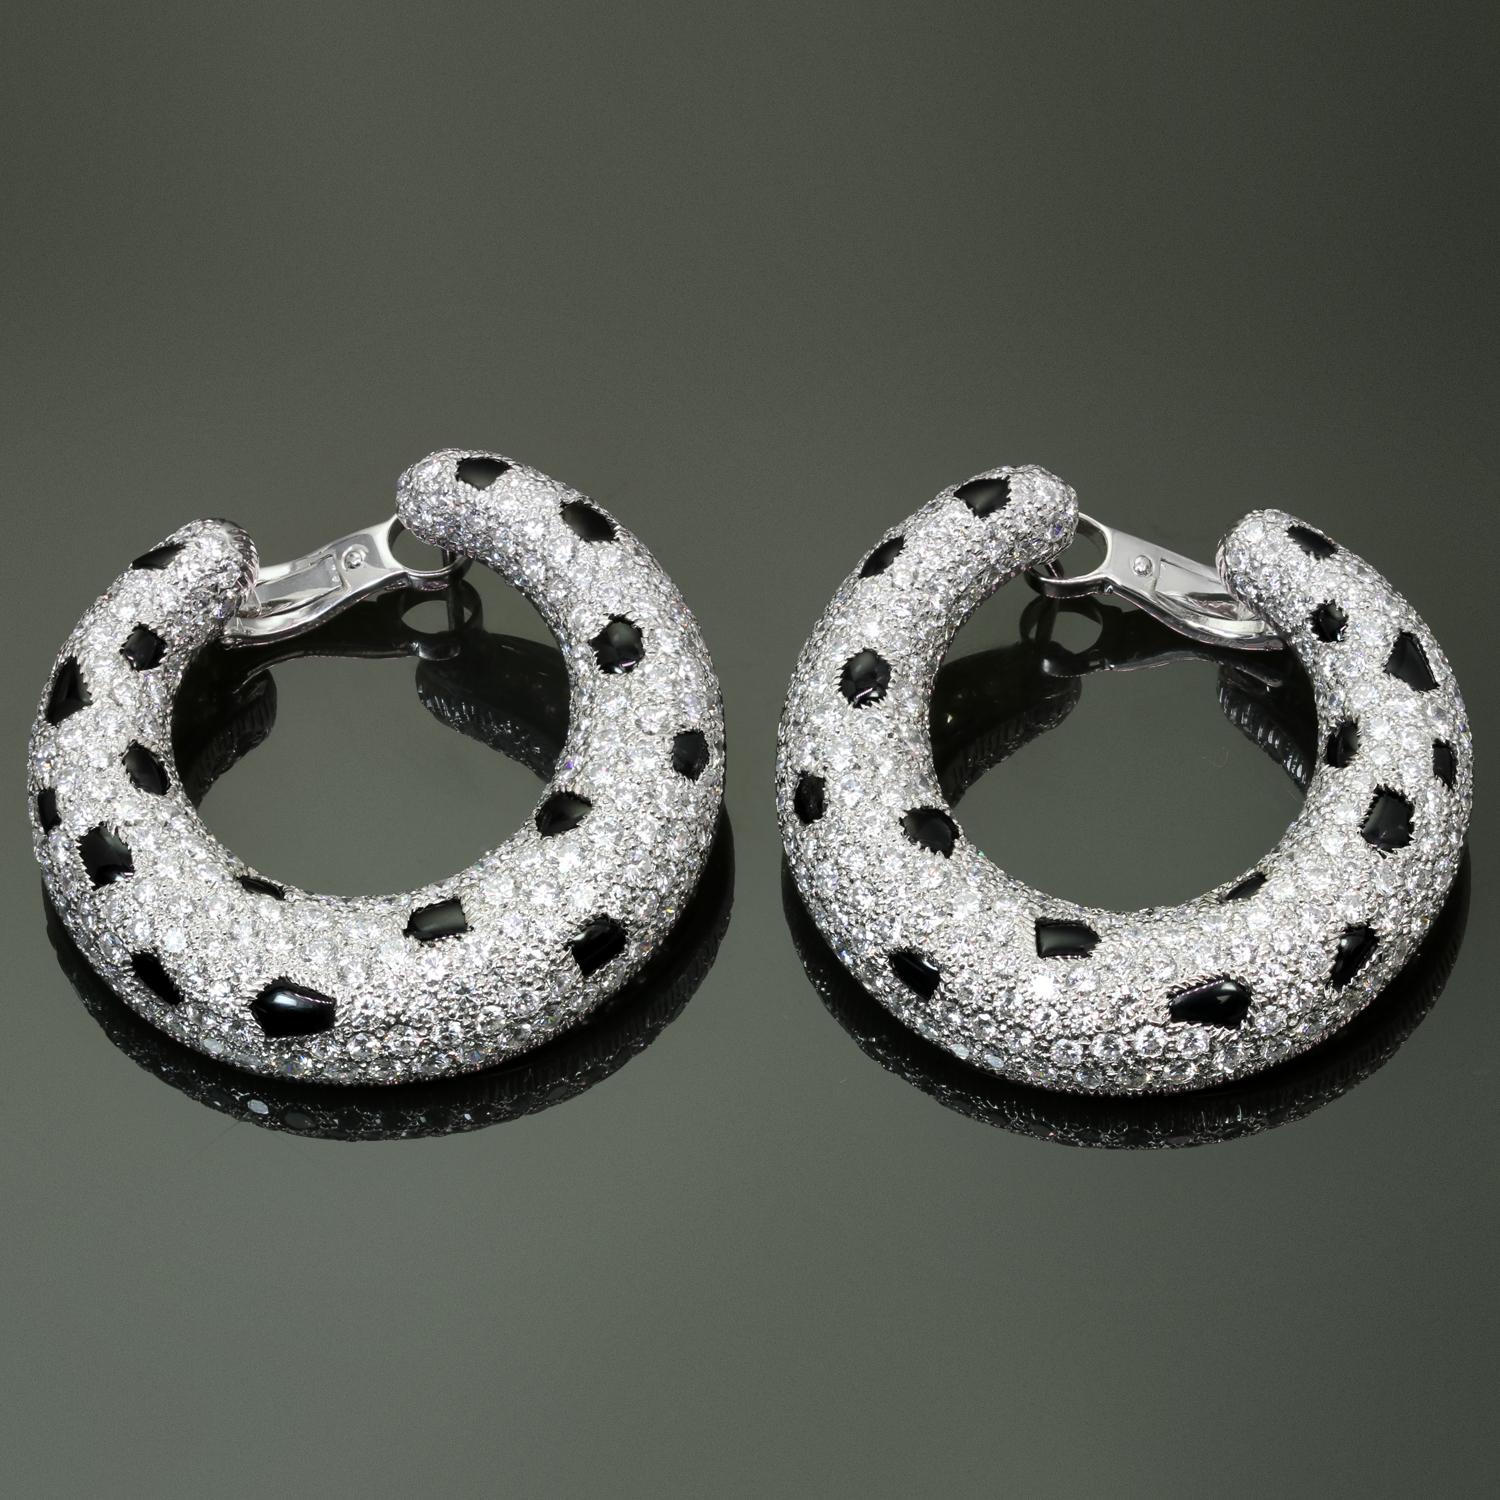 These exquisite Panthere de Cartier large hoop earrings are crafted in platinum and pavé-set with calibré-cut onyx and about 402-404 brilliant-cut round diamonds weighing an estimated 15.0 - 16.0 carats. French assay marks and maker's marks. Made in